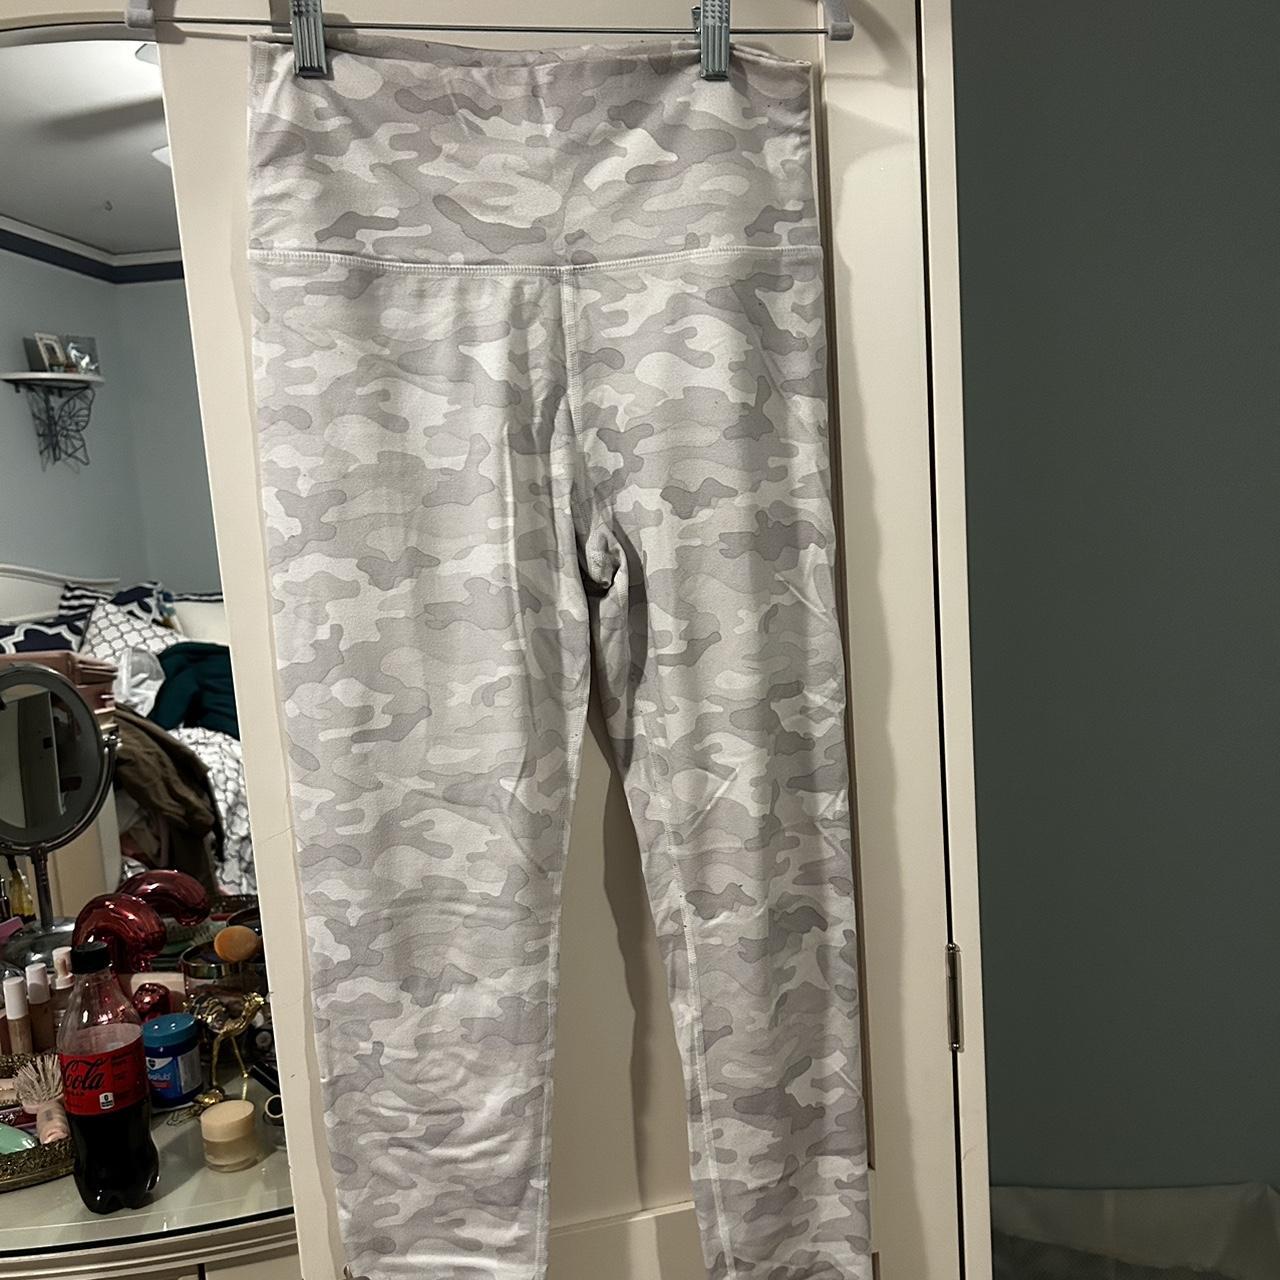 FREE PEOPLE Early Night Cotton Leggings (S) Call it - Depop